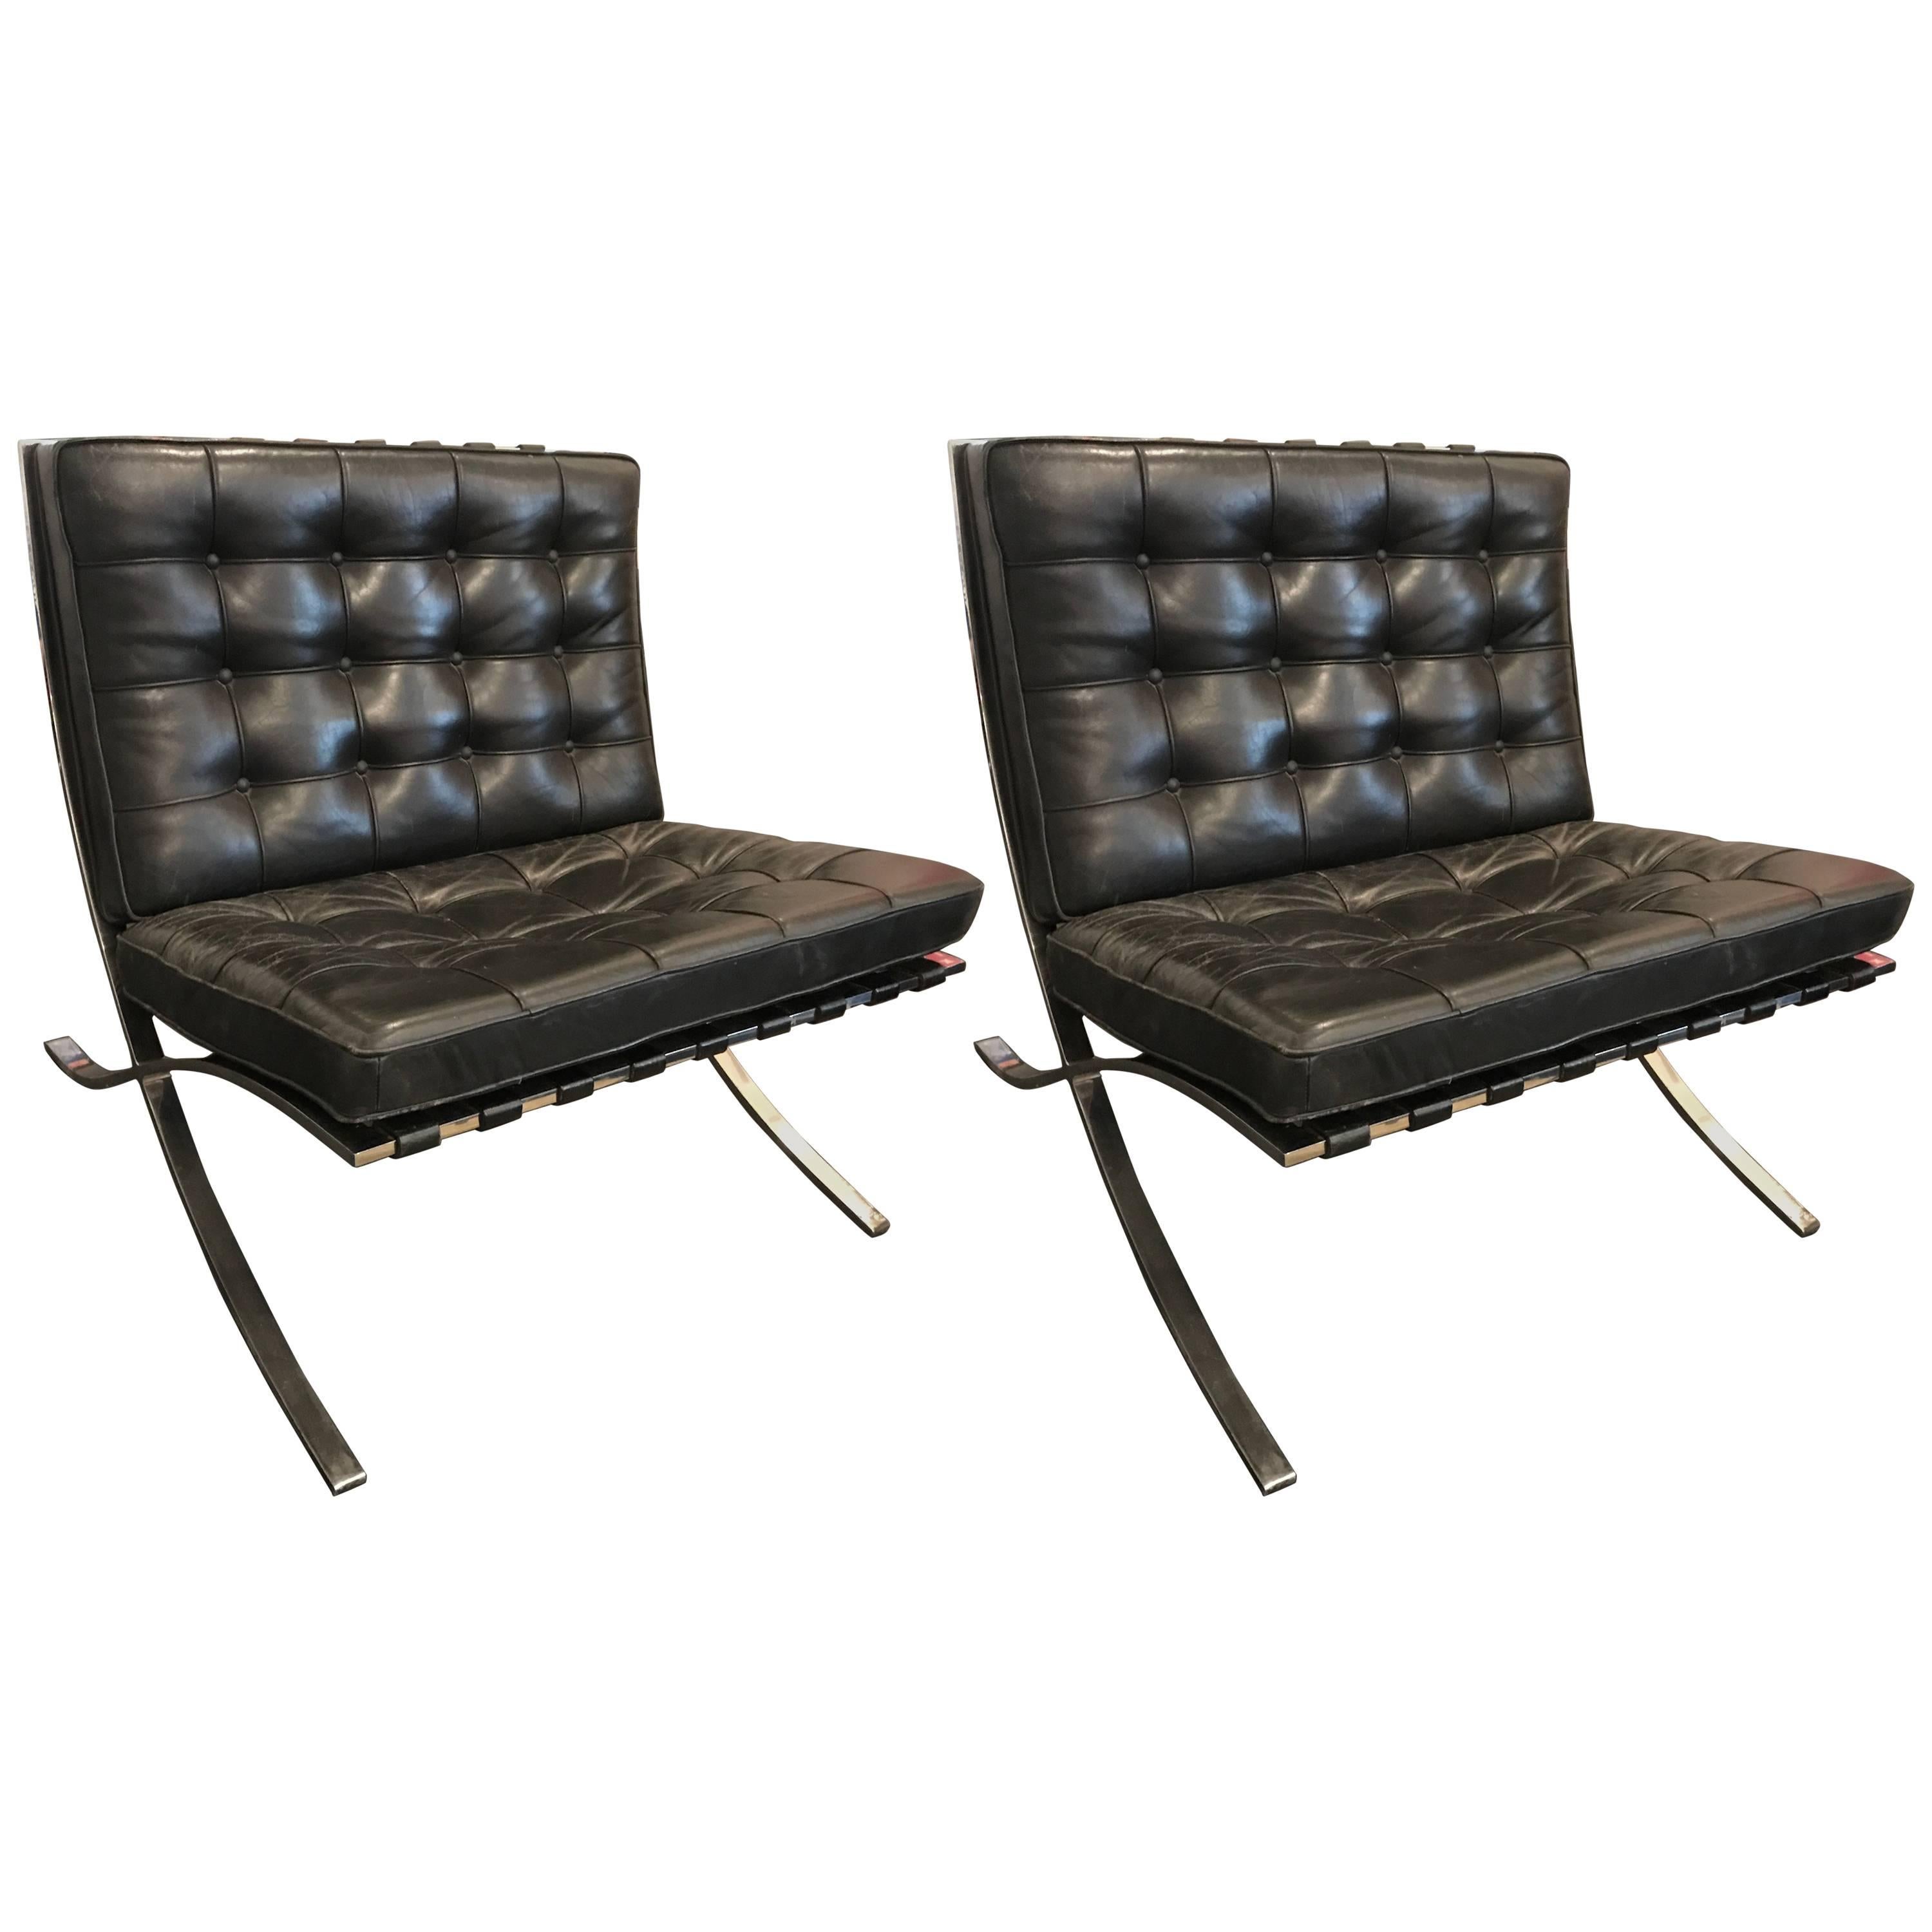 Ludwig Mies van der Rohe Pair of Barcelona Chairs, Knoll, Black Leather